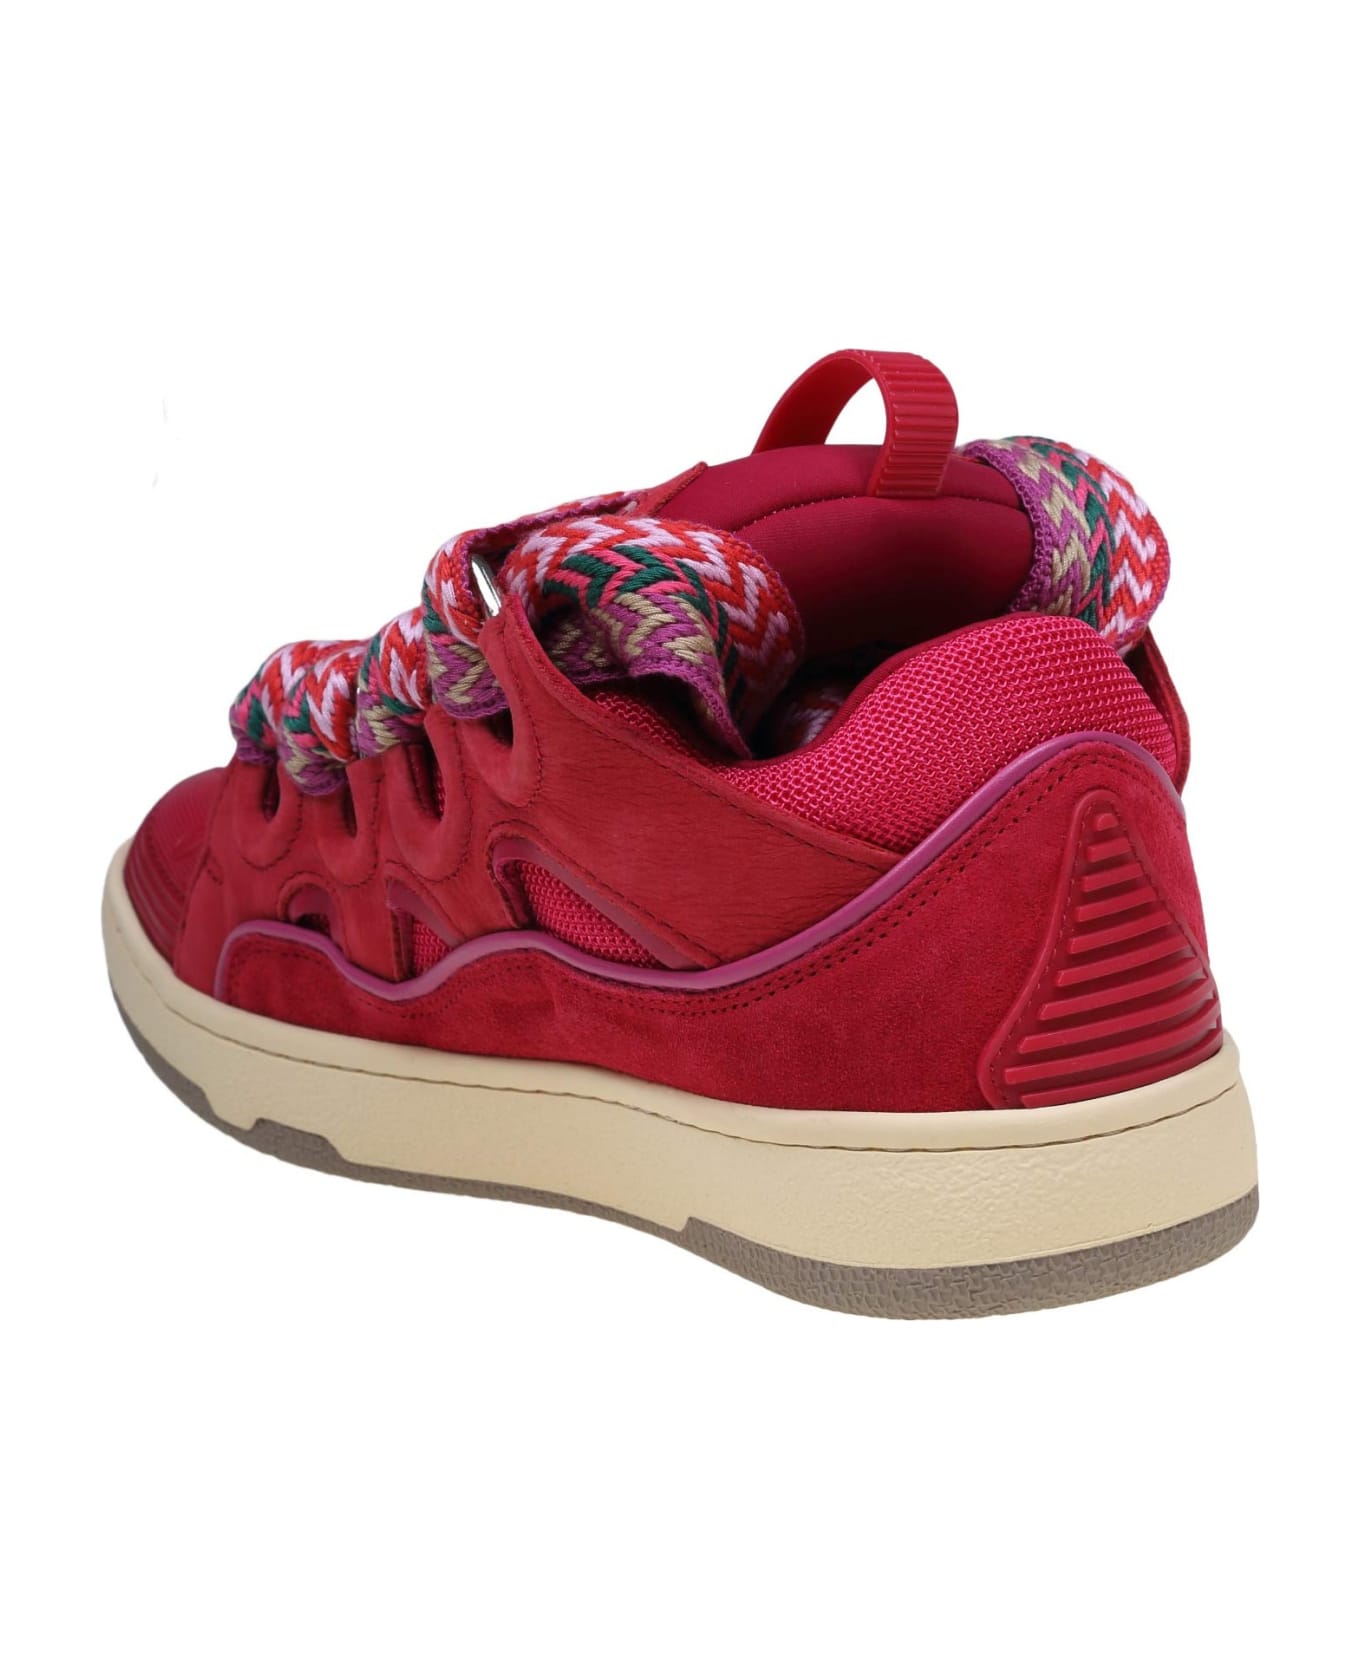 Lanvin Curb Sneakers In Suede And Watermelon Color Fabric - Watermelon